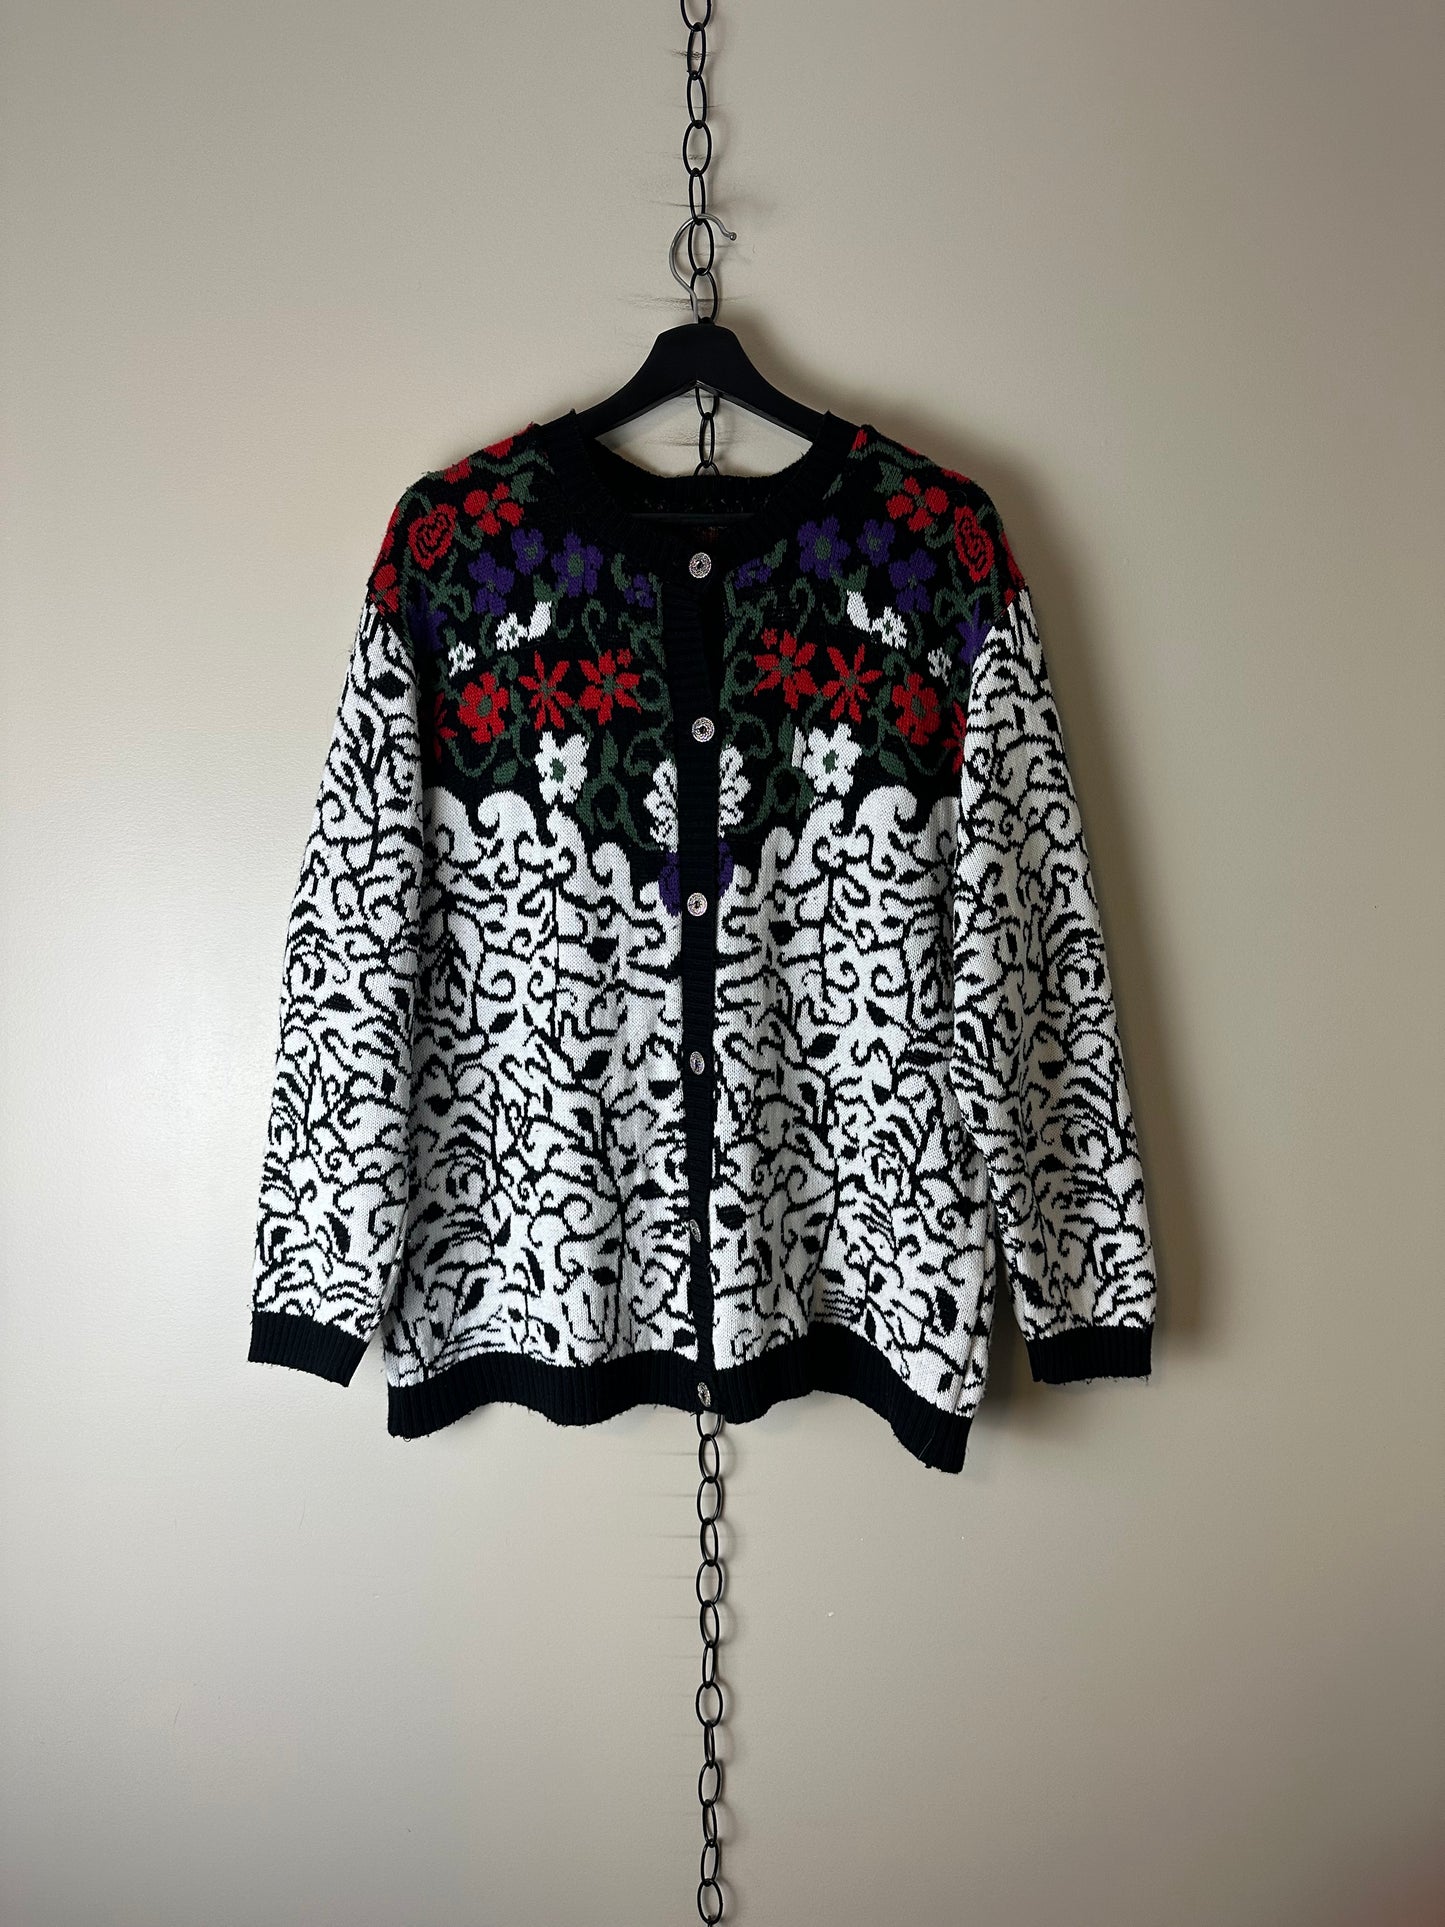 Vintage Floral All Over Pattern Norwegian Cardigan Sweater - L